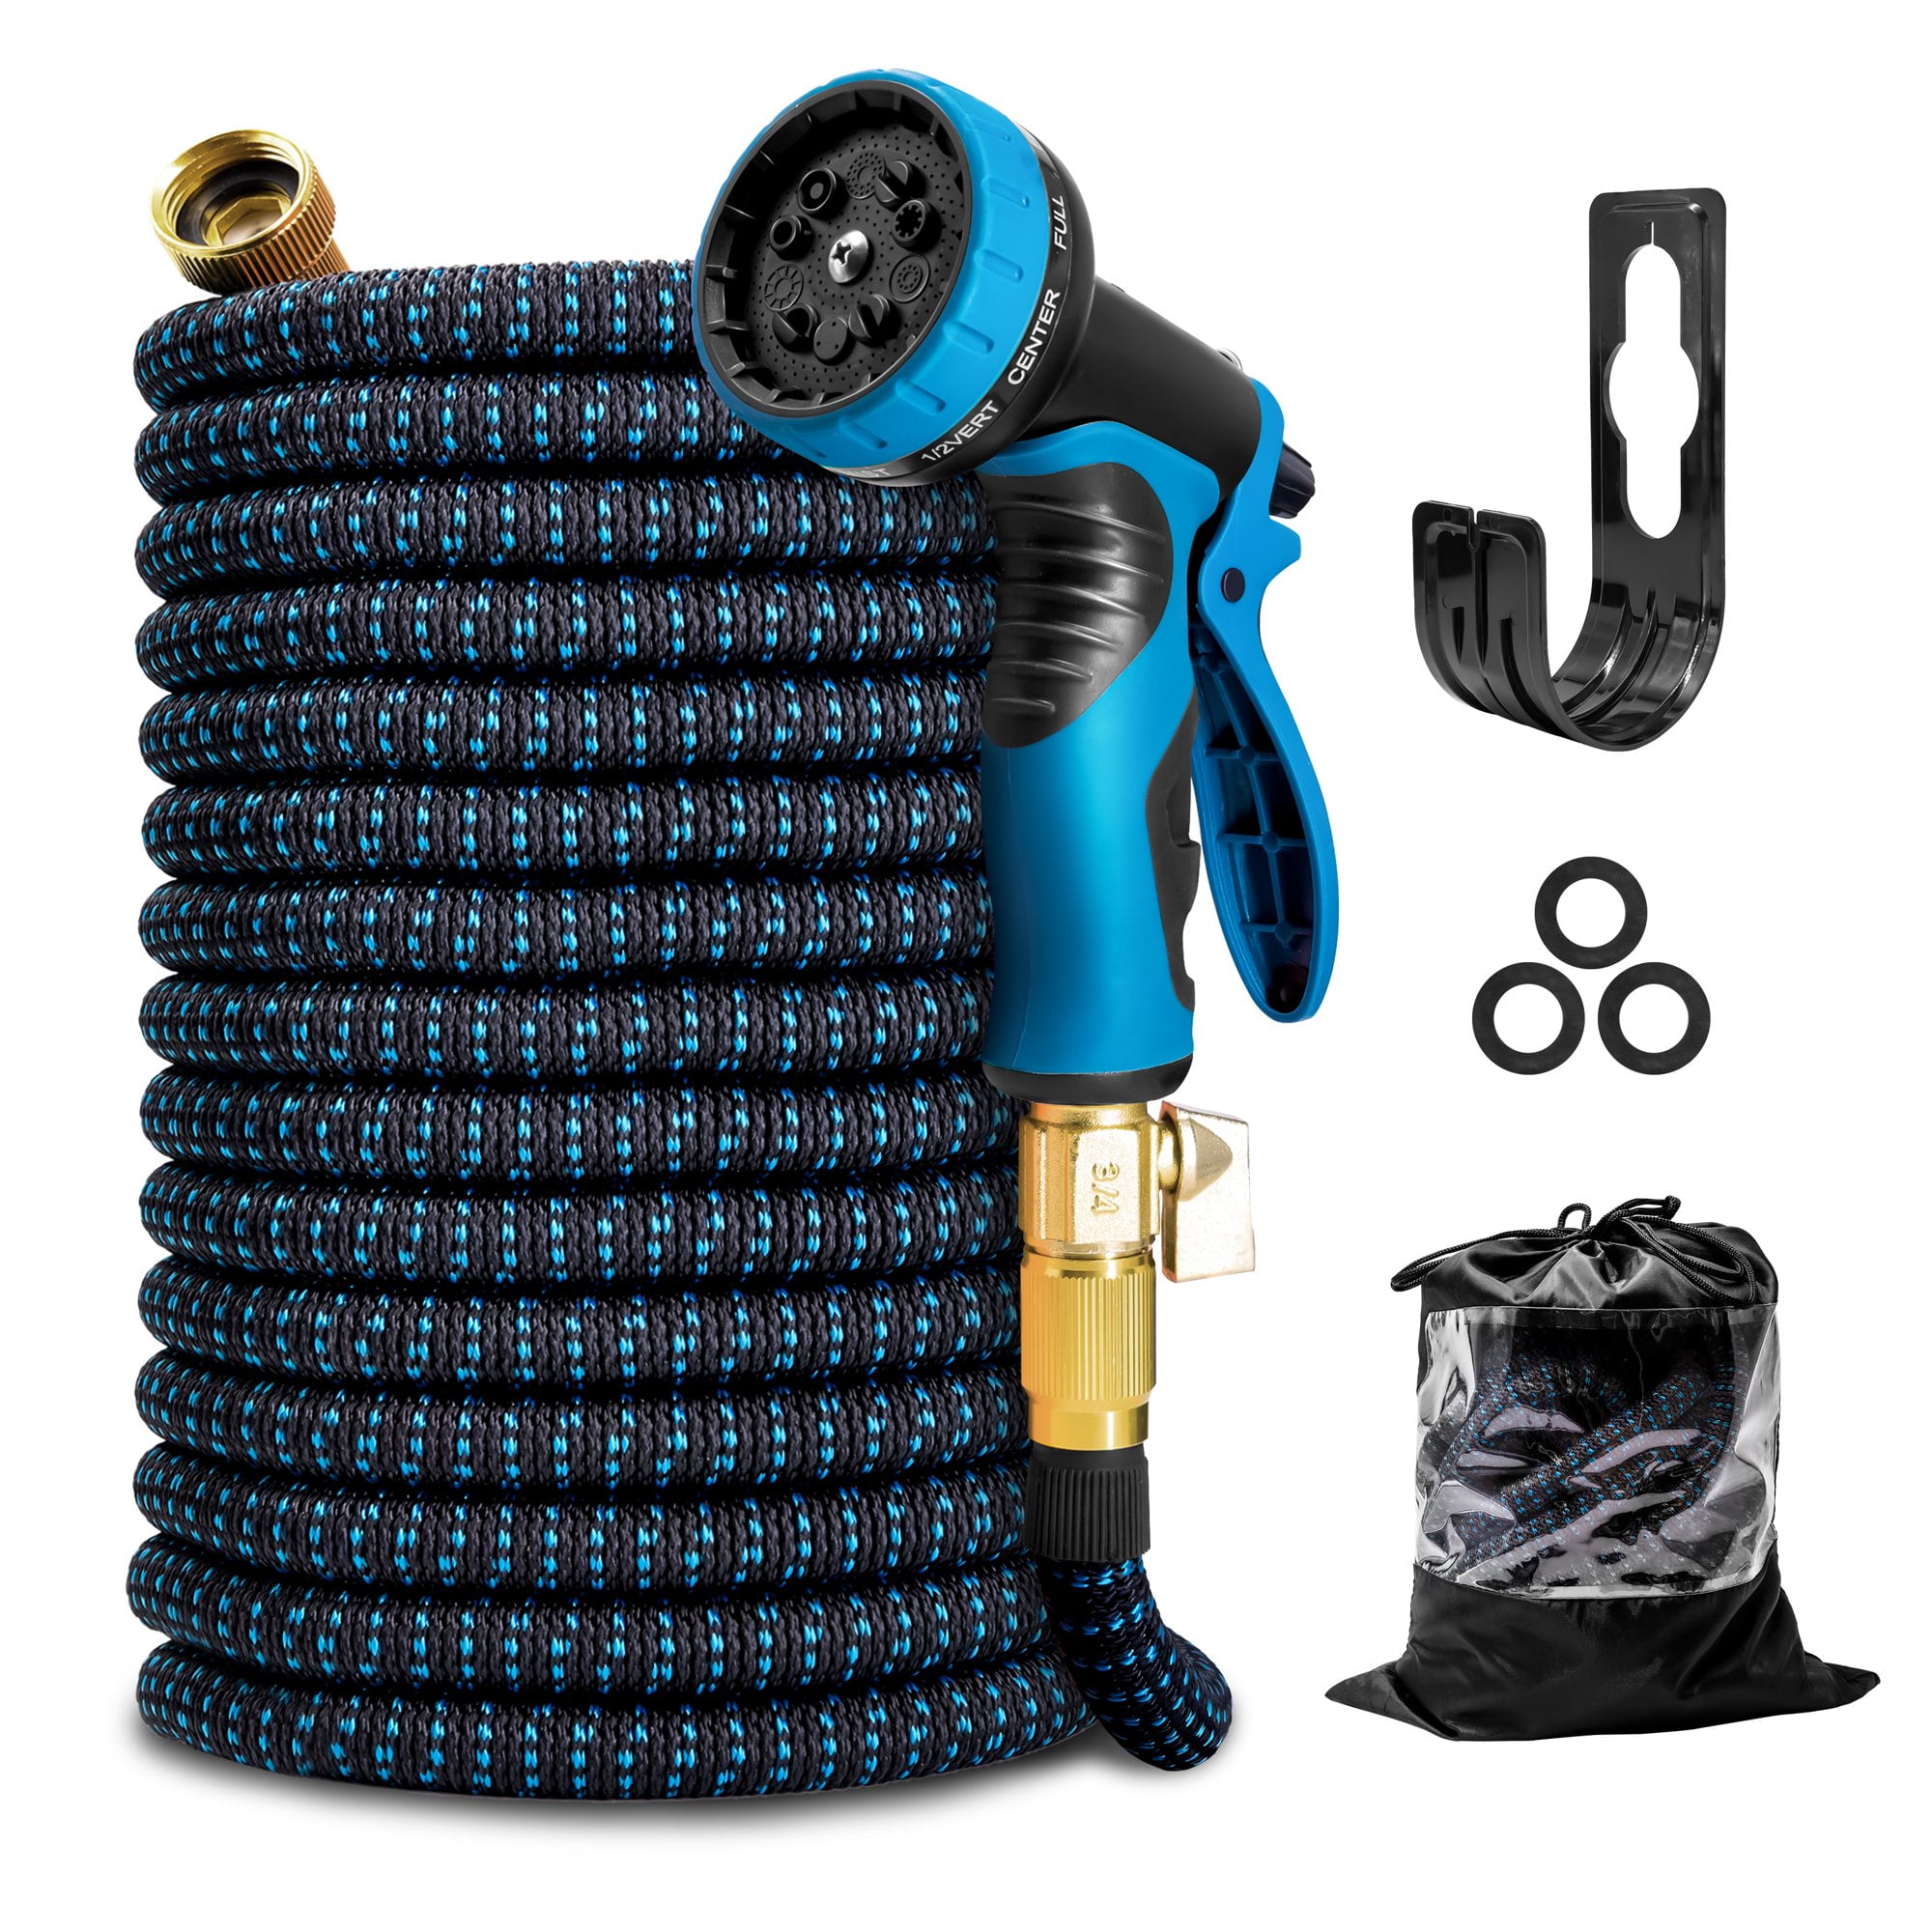 Kotto Expandable Garden Hose, Water Hose for Outside with 10 Spray Nozzles, Hose Holder, Multi-Purpose Anti-Rust Solid Brass Connector, Leak-Proof Design, Blue, 150 ft - image 1 of 8